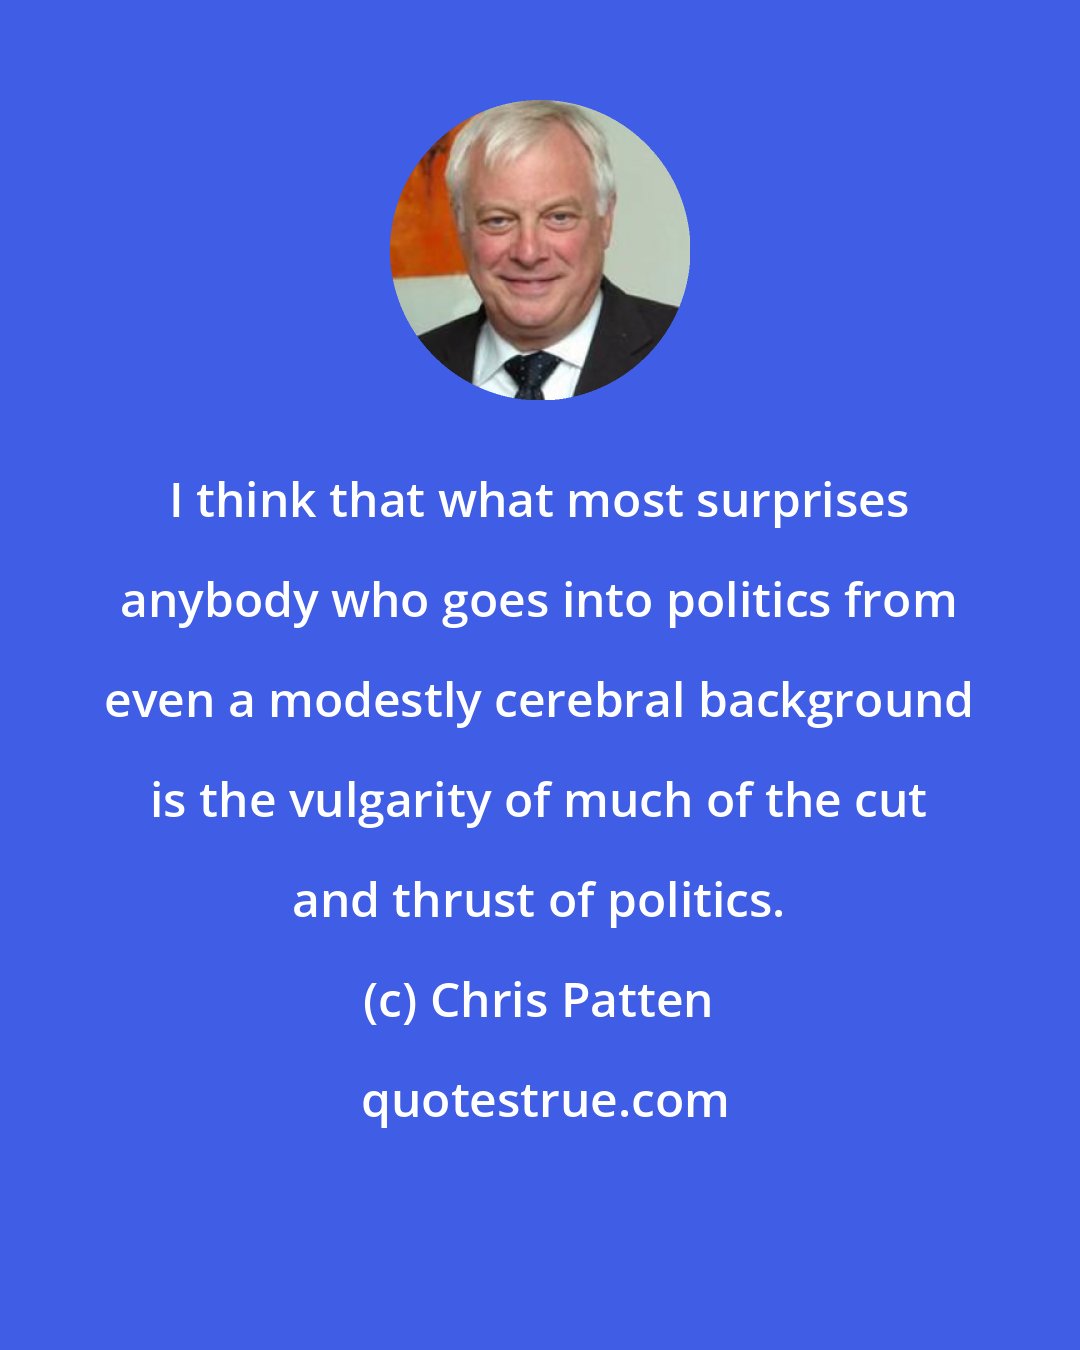 Chris Patten: I think that what most surprises anybody who goes into politics from even a modestly cerebral background is the vulgarity of much of the cut and thrust of politics.